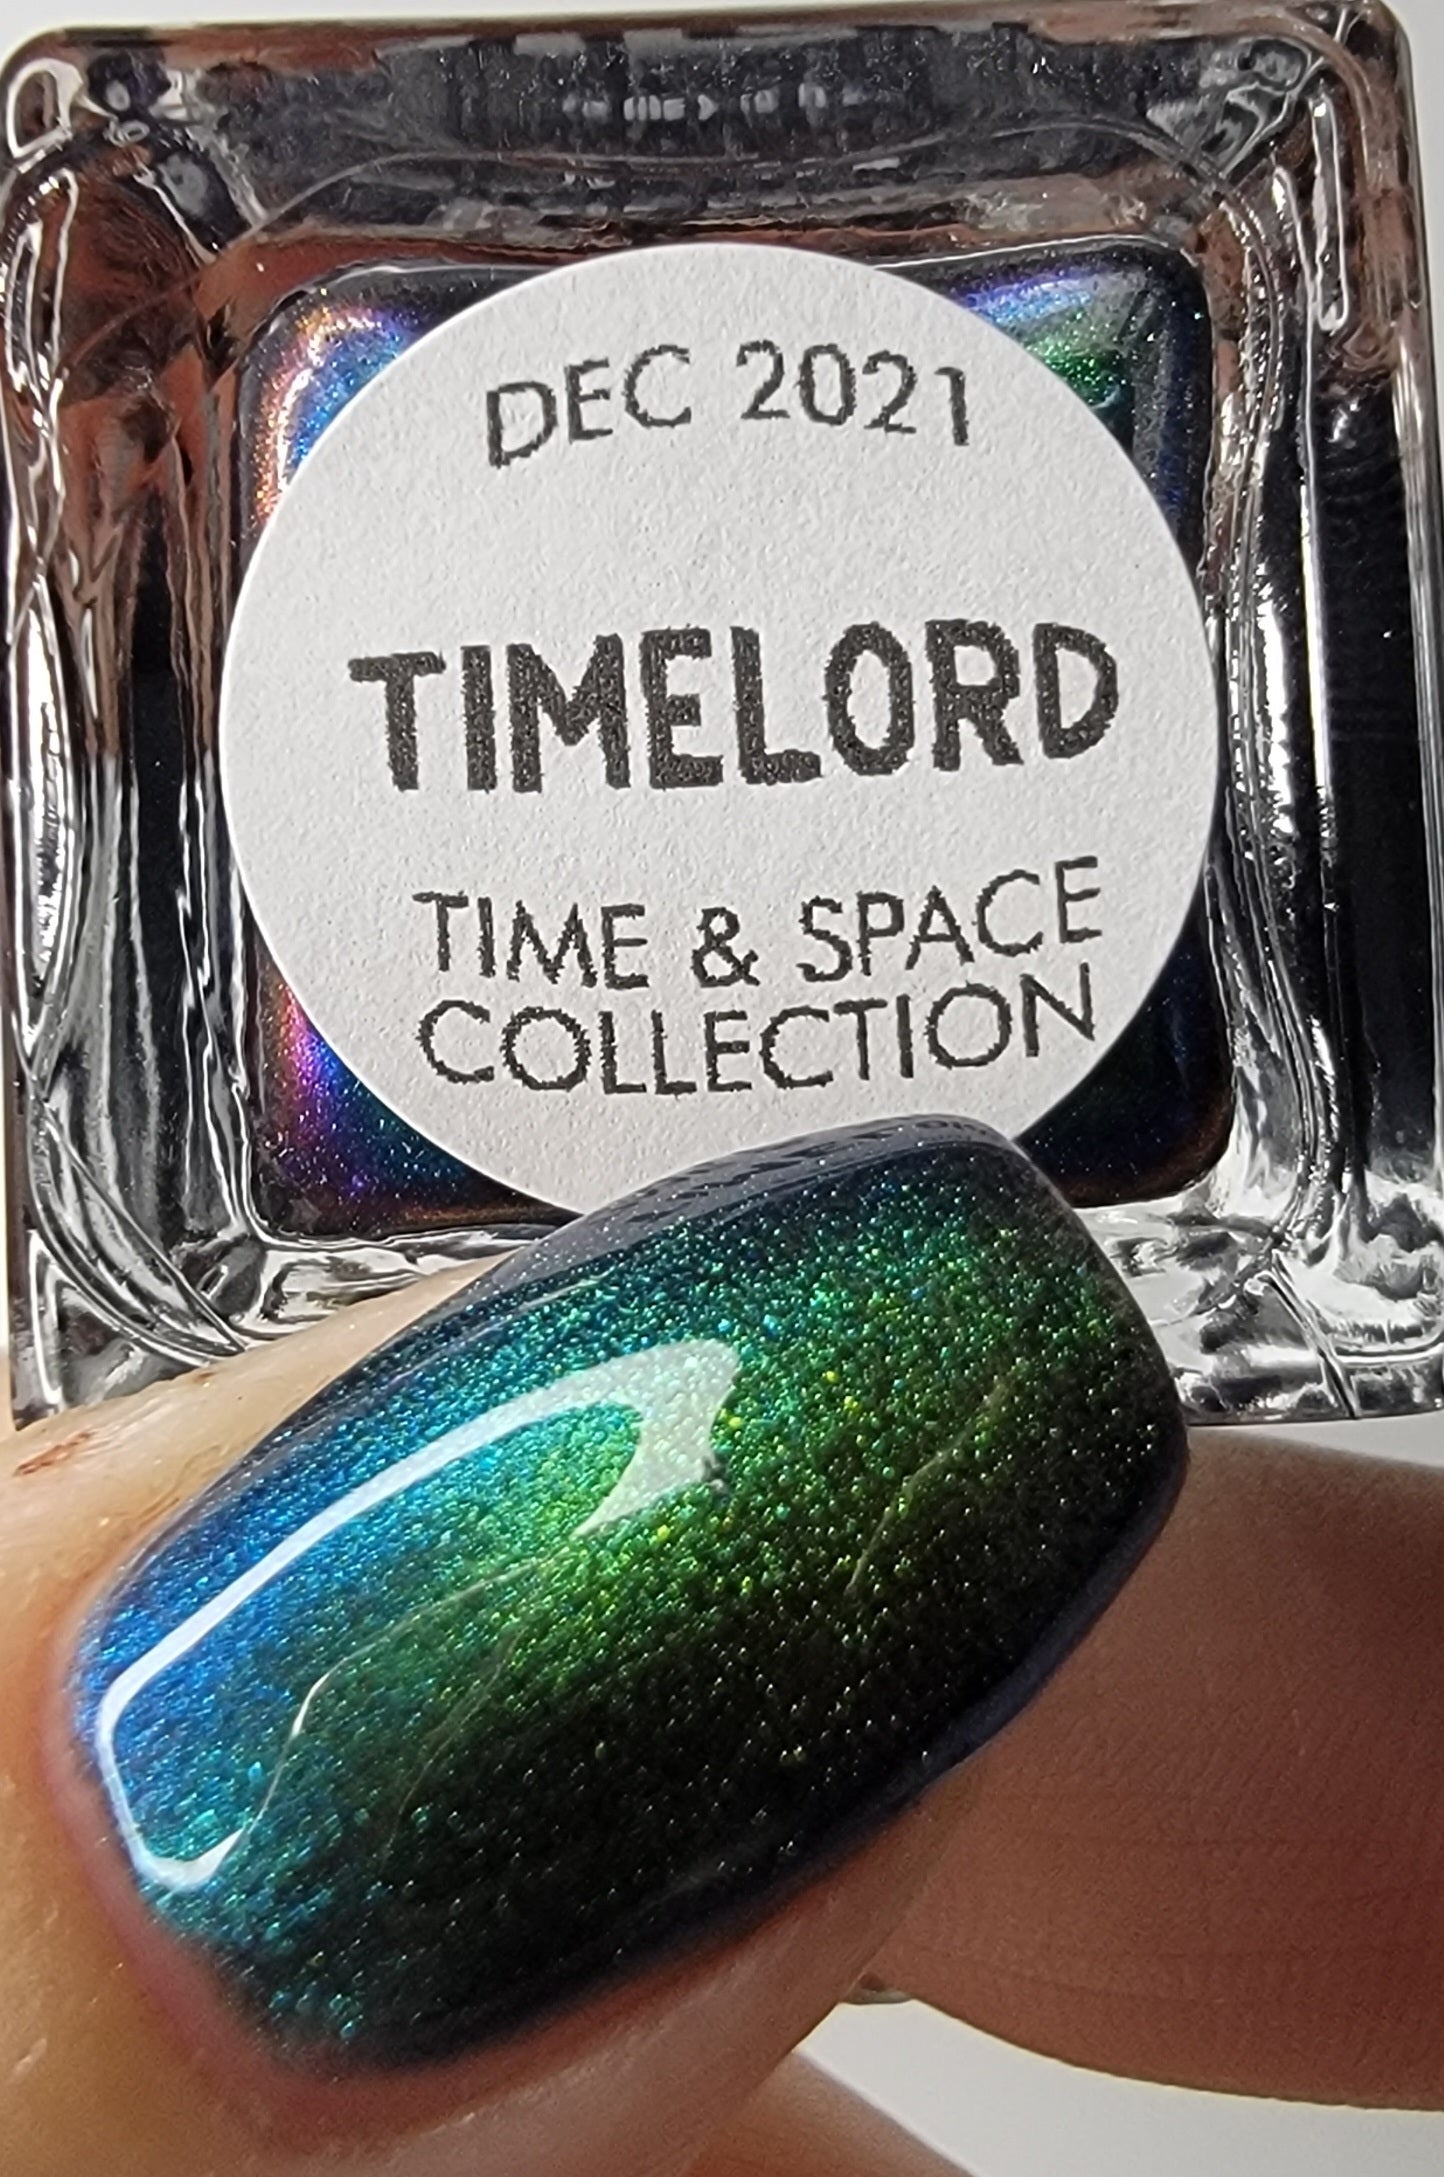 Timelord